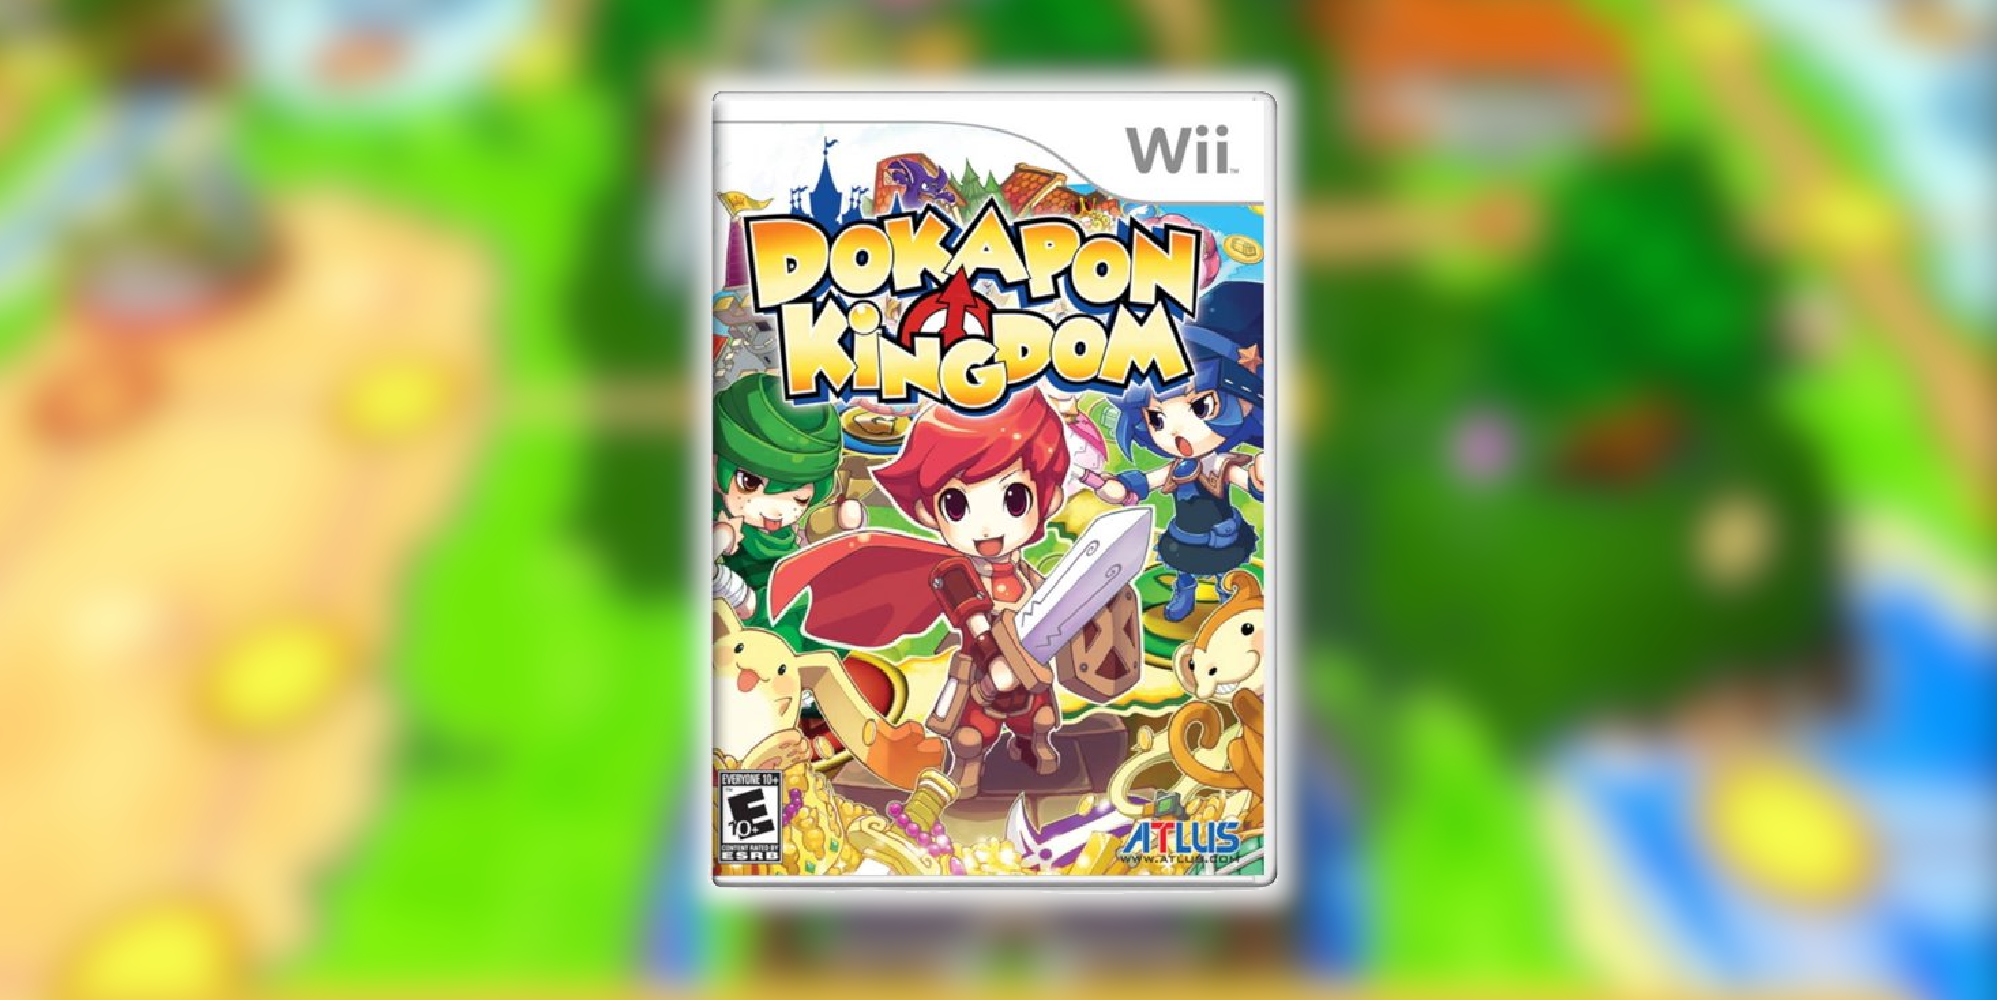 Party Game and RPG Hybrid Dokapon Kingdom for Wii